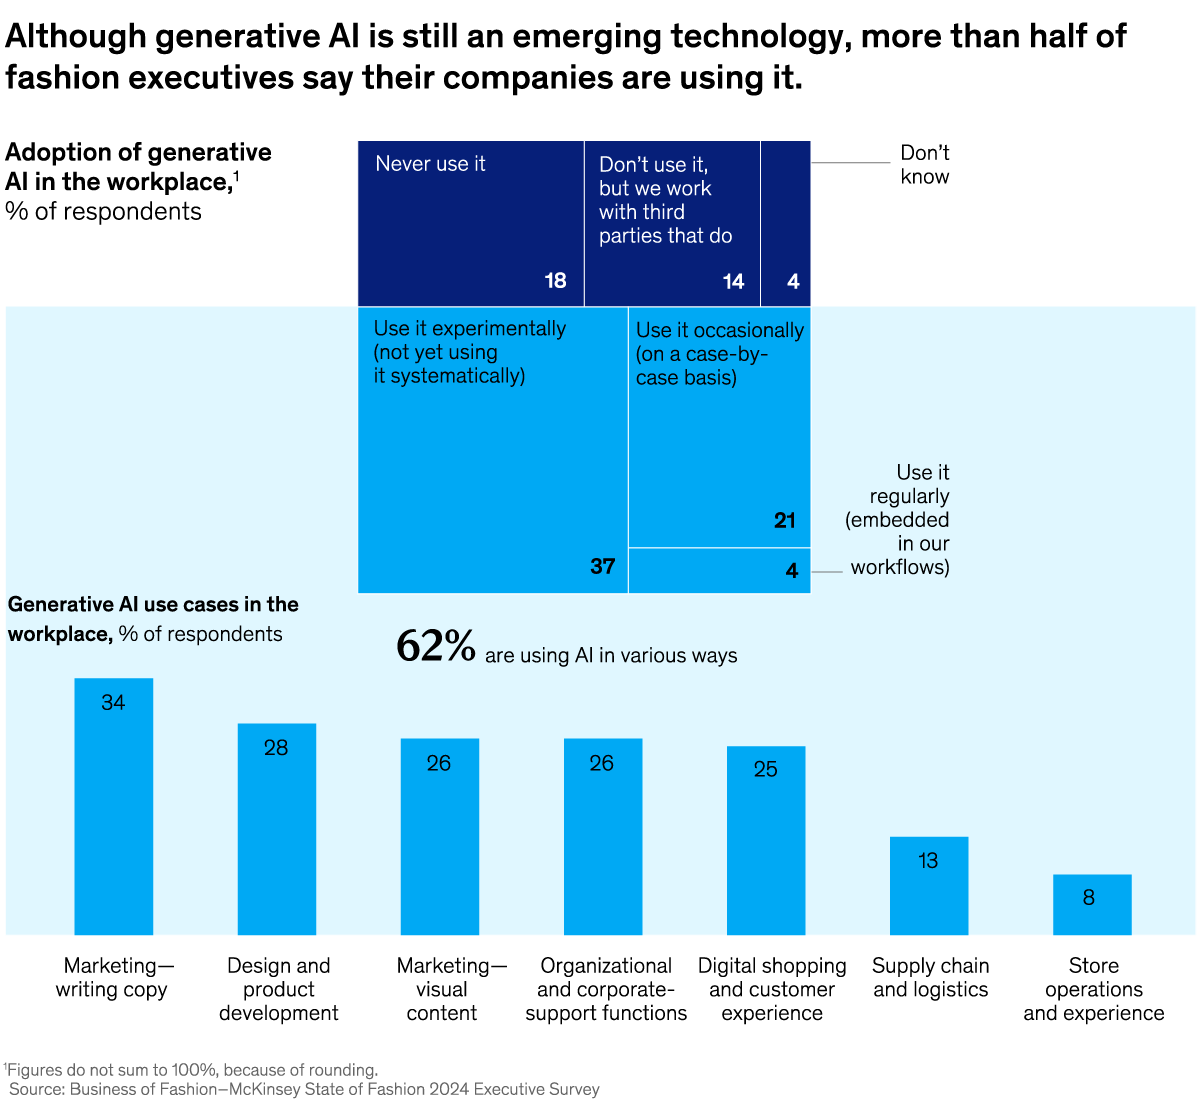 A chart titled “Although generative AI is still an emerging technology, more than half of fashion executives say their companies are using it.” Click to open the full article on McKinsey.com.